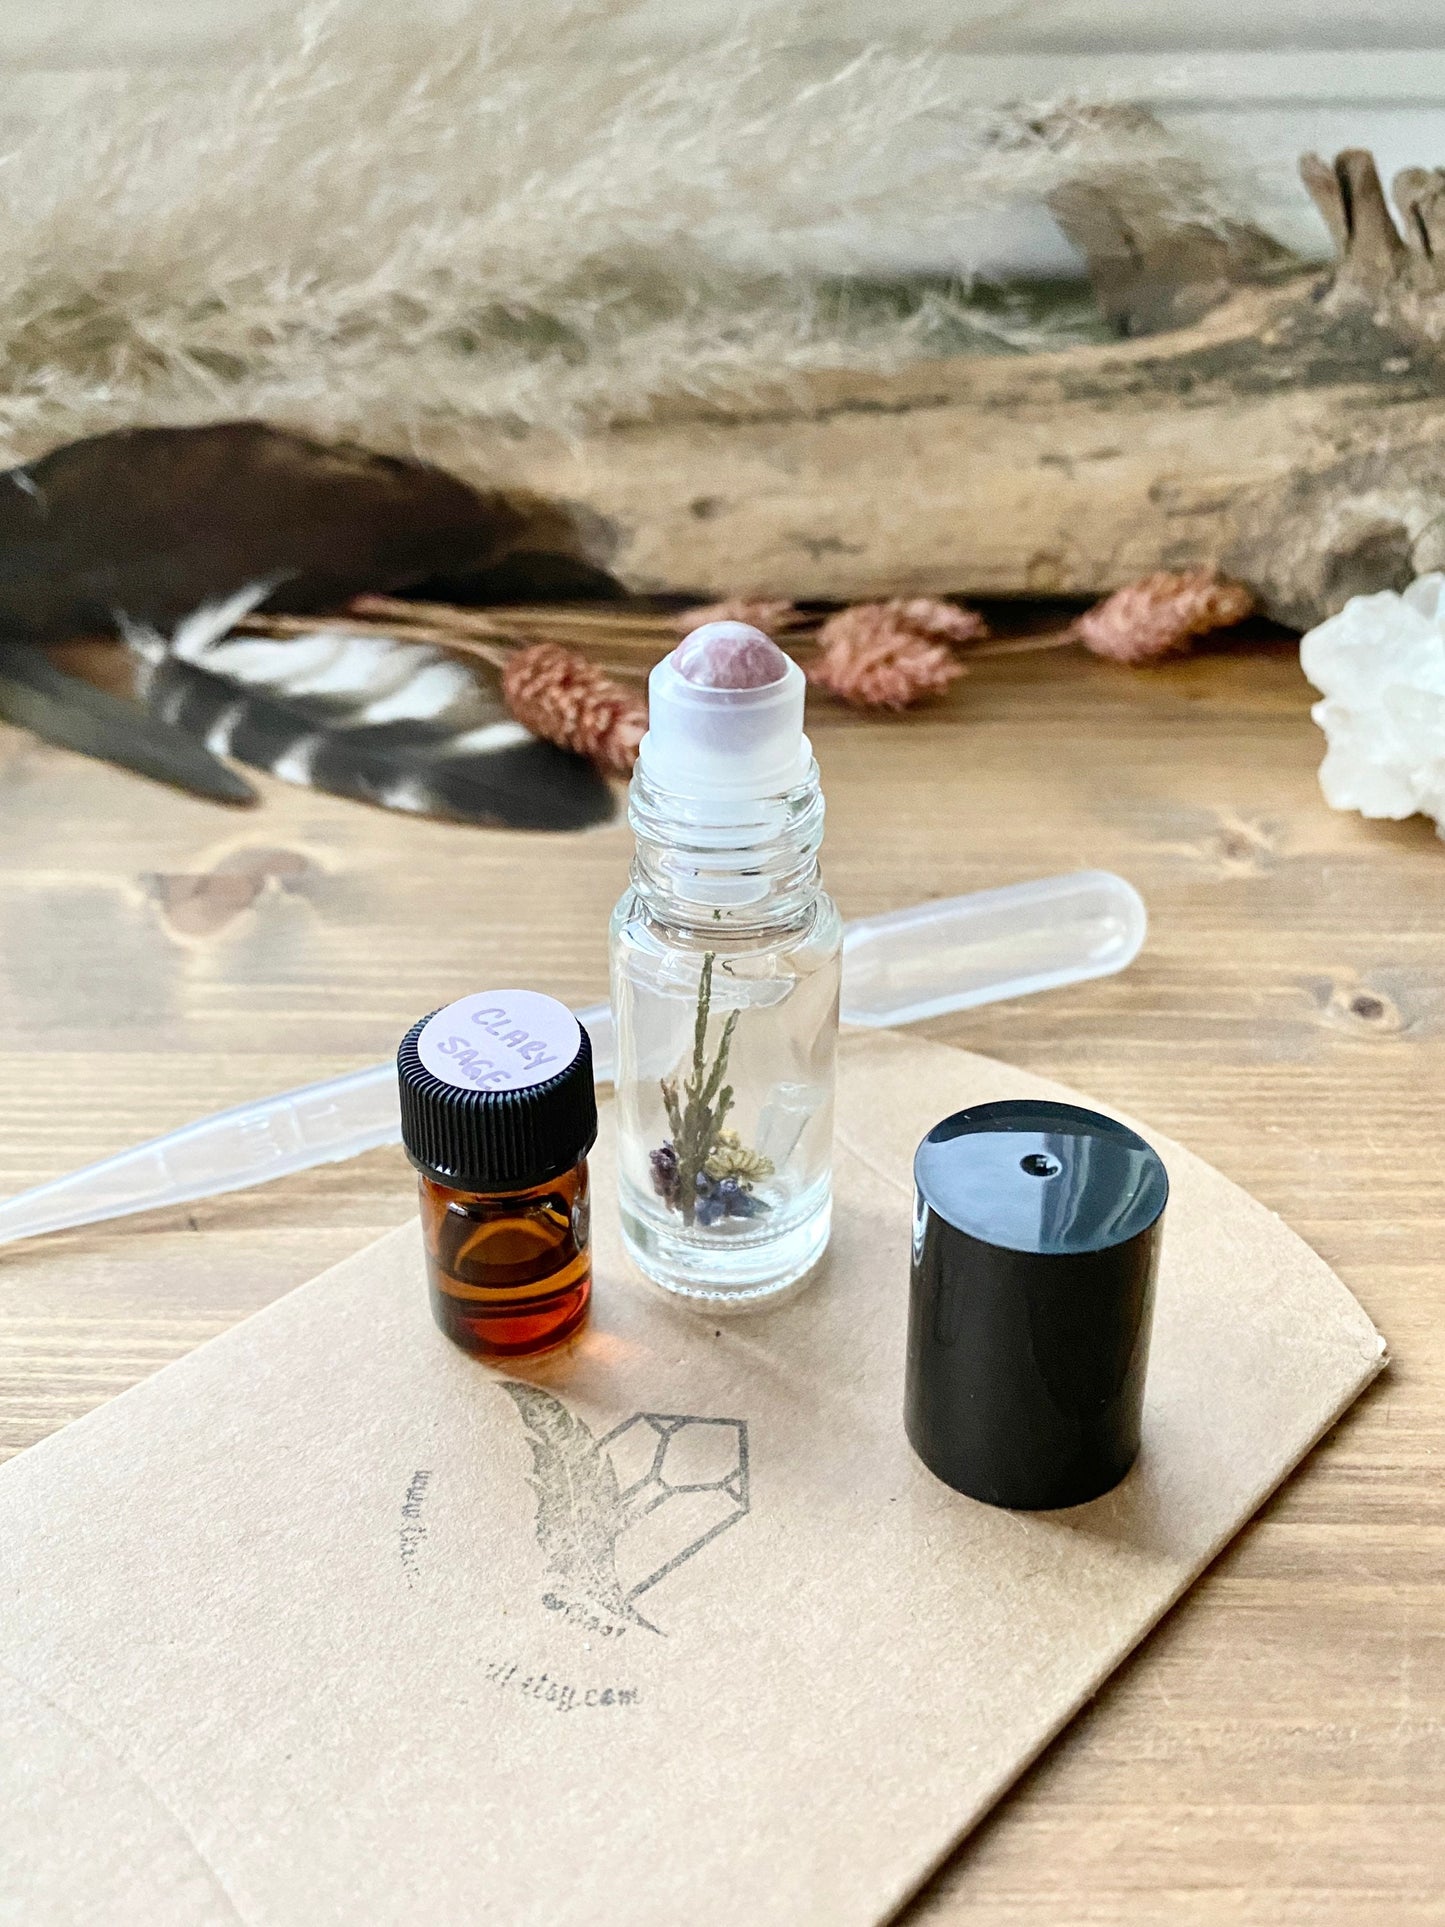 DIY: Aromatherapy Oil - 5ml Glass Bottle with Lepidolite Gemstone Roller and Clary Sage Essential Oil with Quartz Crystal & Dried Flowers